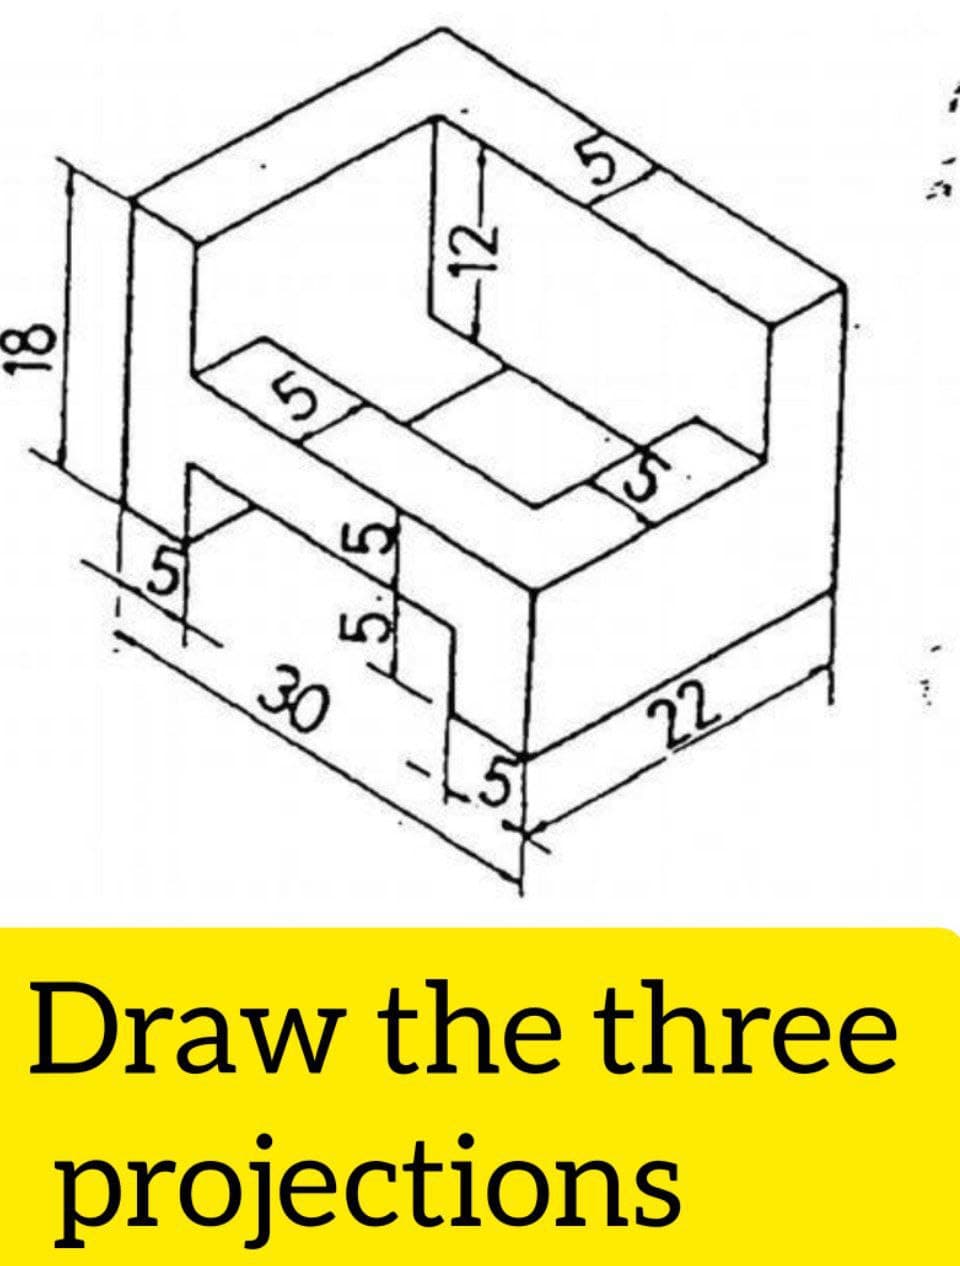 18
5
-12-
30
22
Draw the three
projections